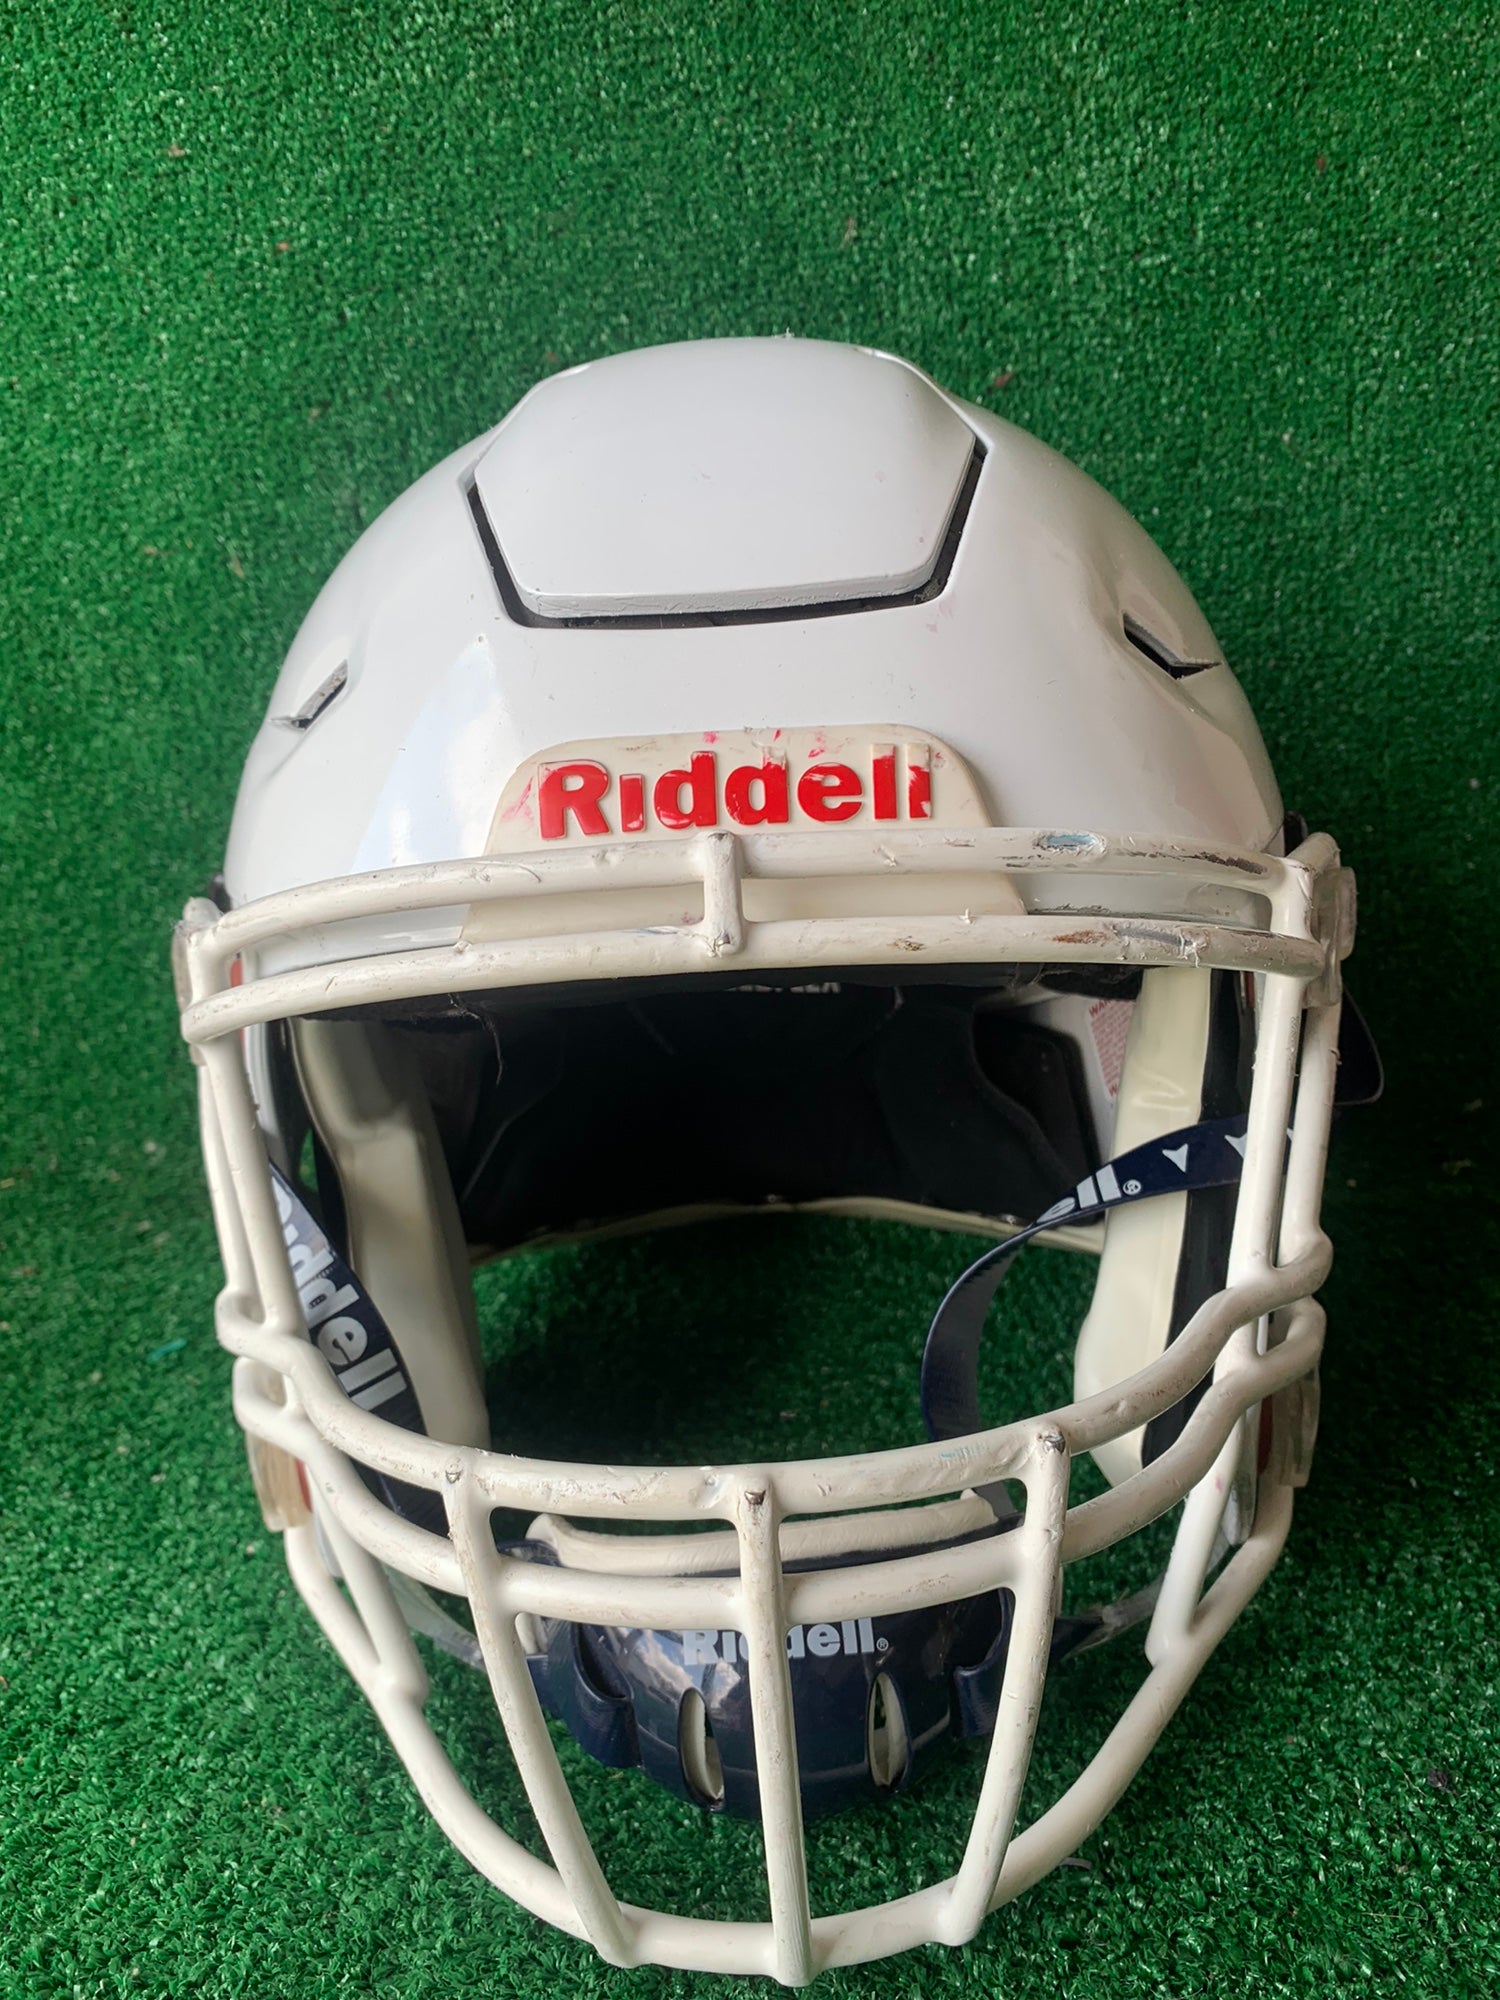 Details about   RIDDELL LACROSSE HELMET GREAT CONDITION!!! WHITE AND RED ADULT LARGE 